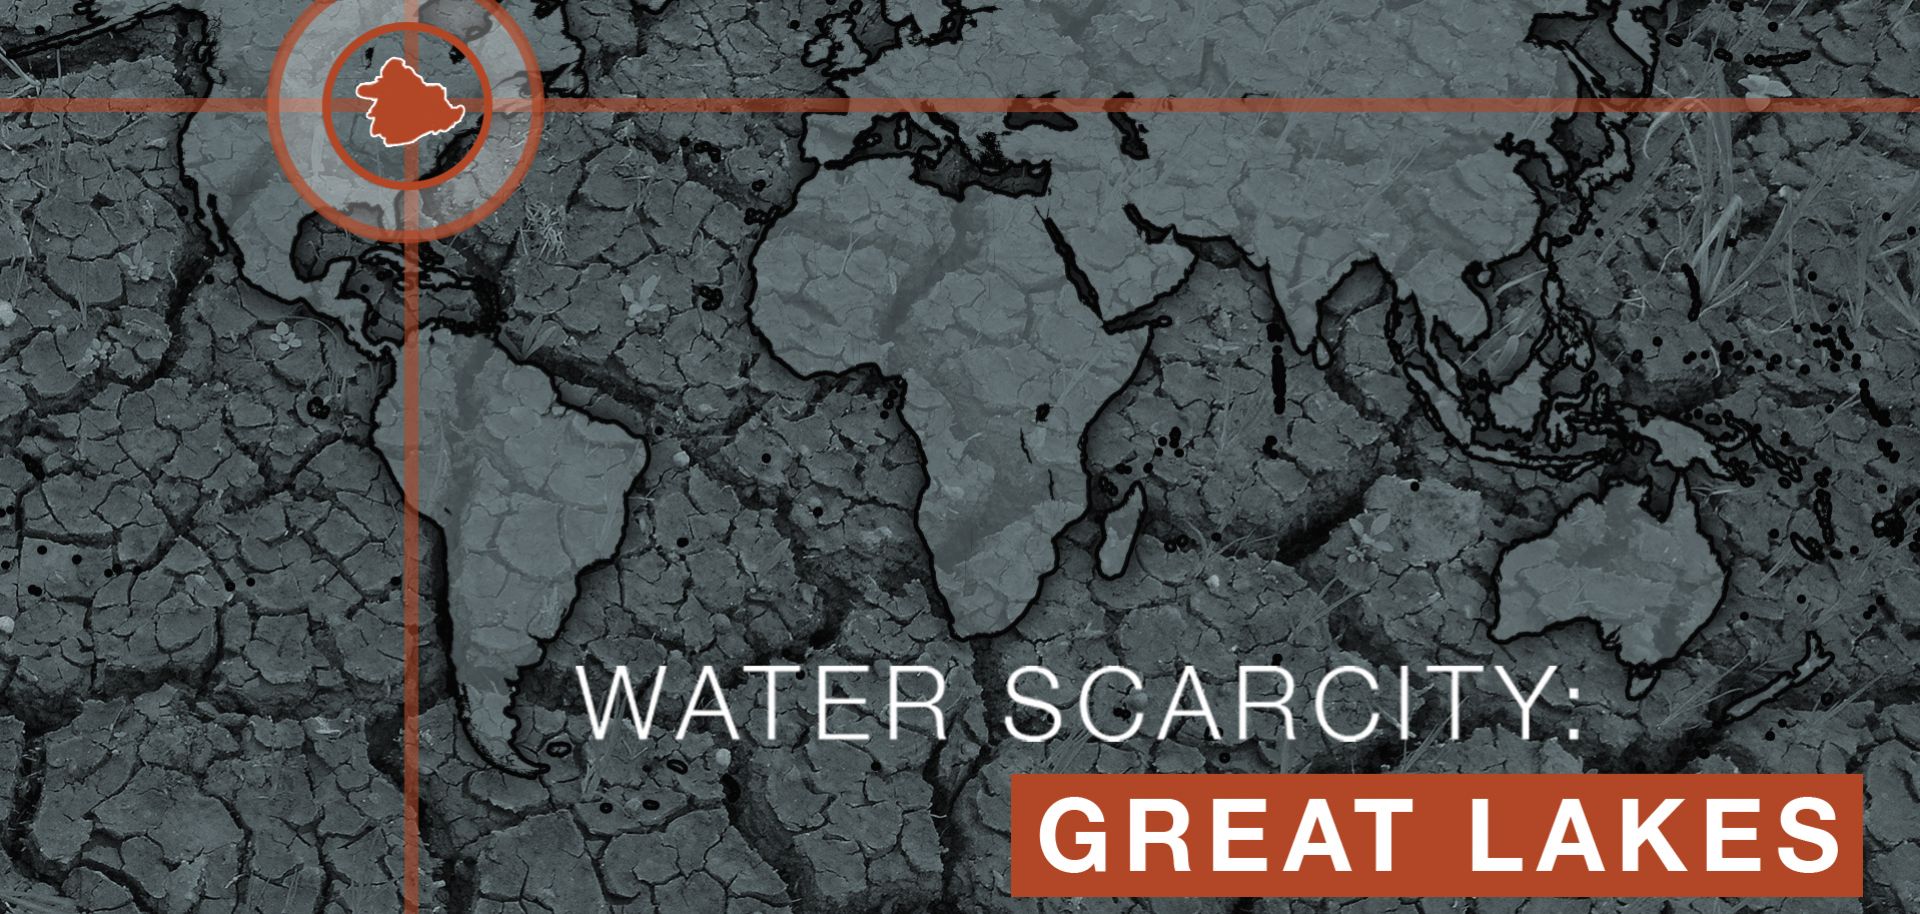 Great Lakes: A More Secure Water Source